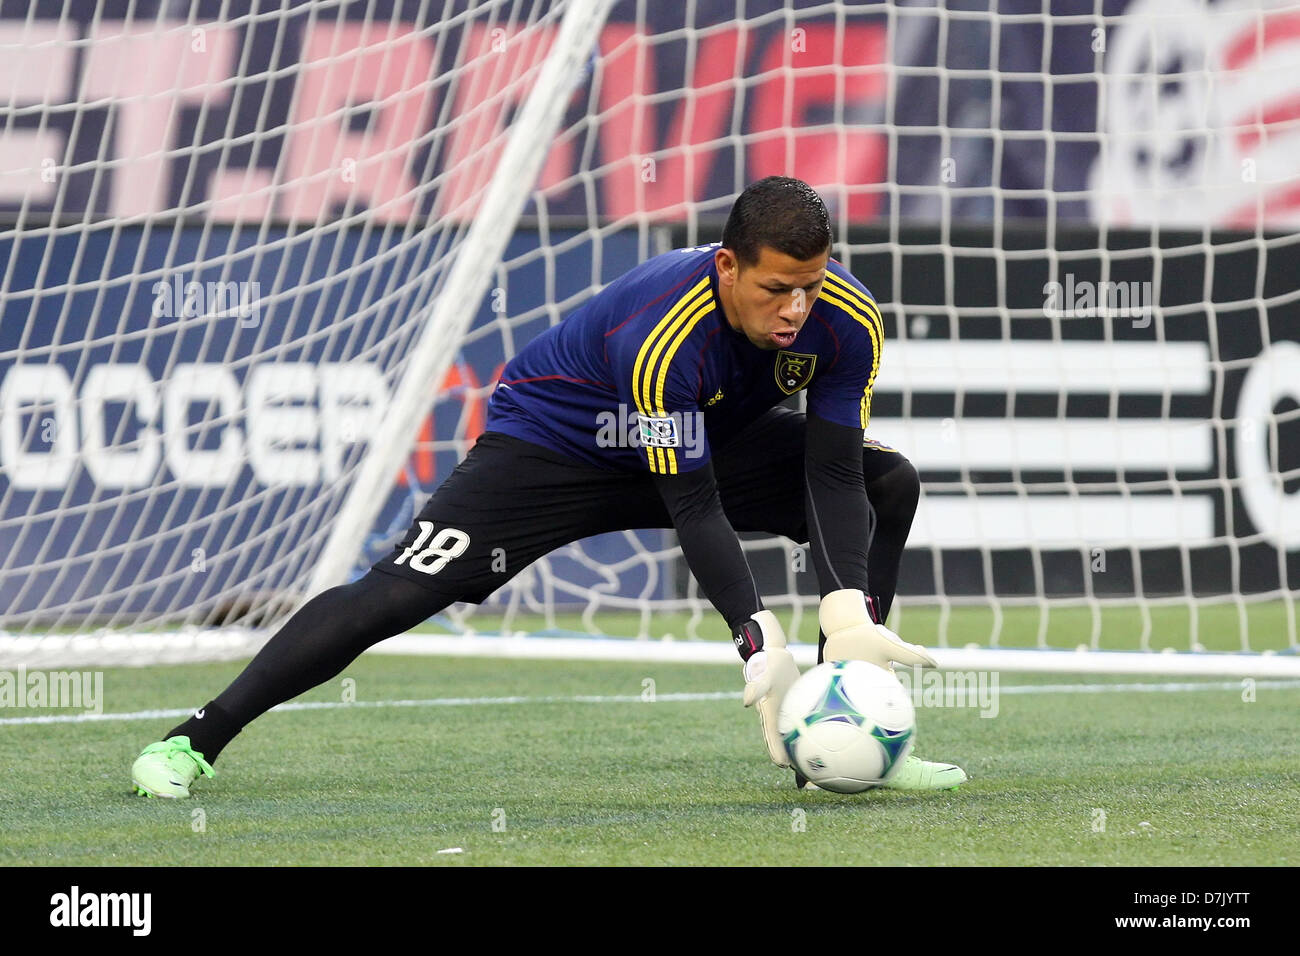 Foxborough, Massachusetts, USA. 8th May 2013. Real Salt Lake goalkeeper Nick Rimando (18) warms up prior to the MLS game between the New England Revolution and Real Salt Lake at Gillette Stadium. Anthony Nesmith/CSM/Alamy Live News Stock Photo